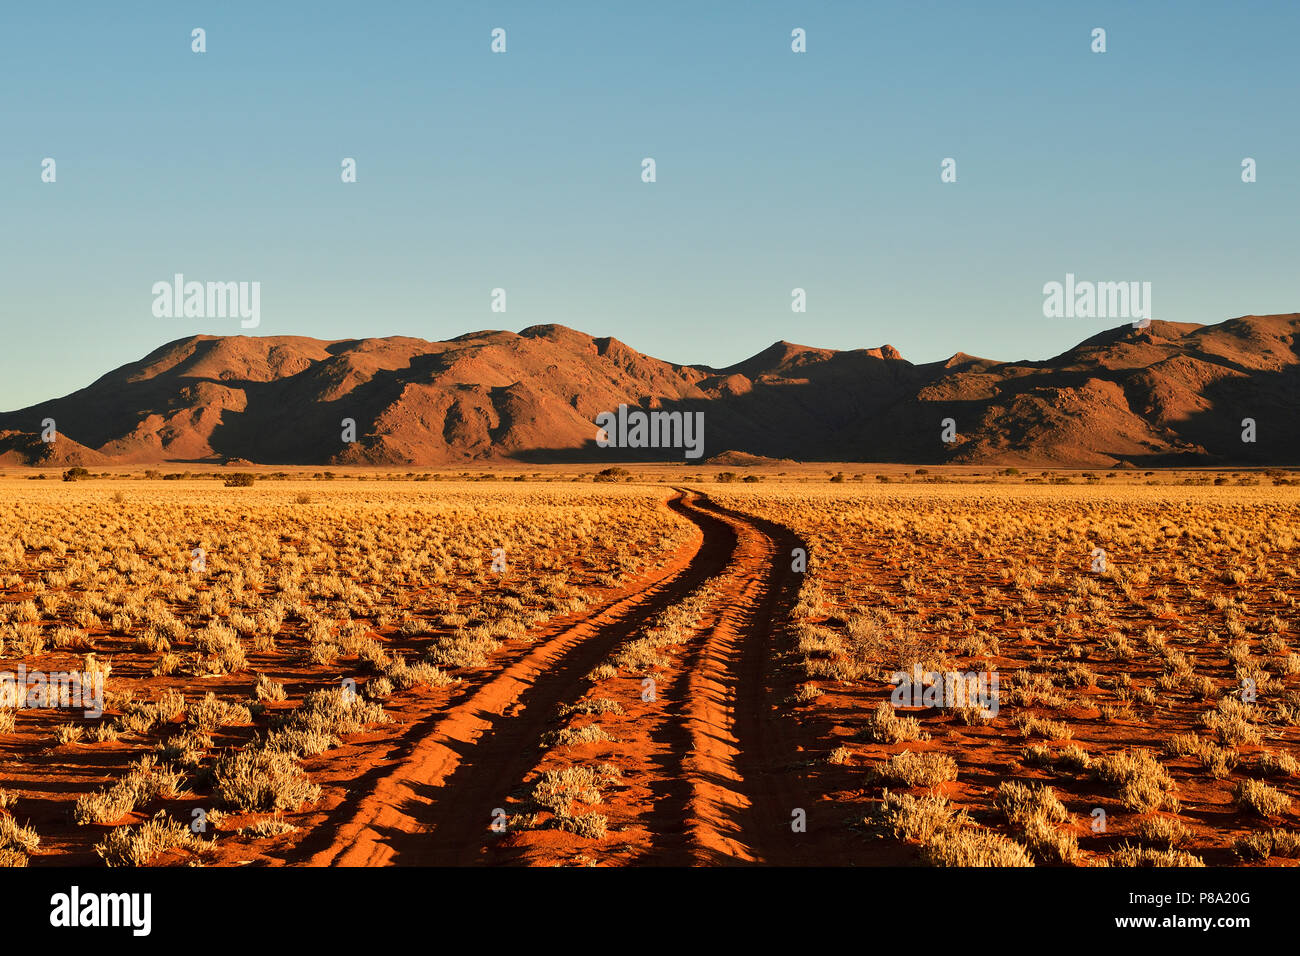 Sandtrack through desert landscape at evening light, in the back Tiras mountains, Namibia Stock Photo